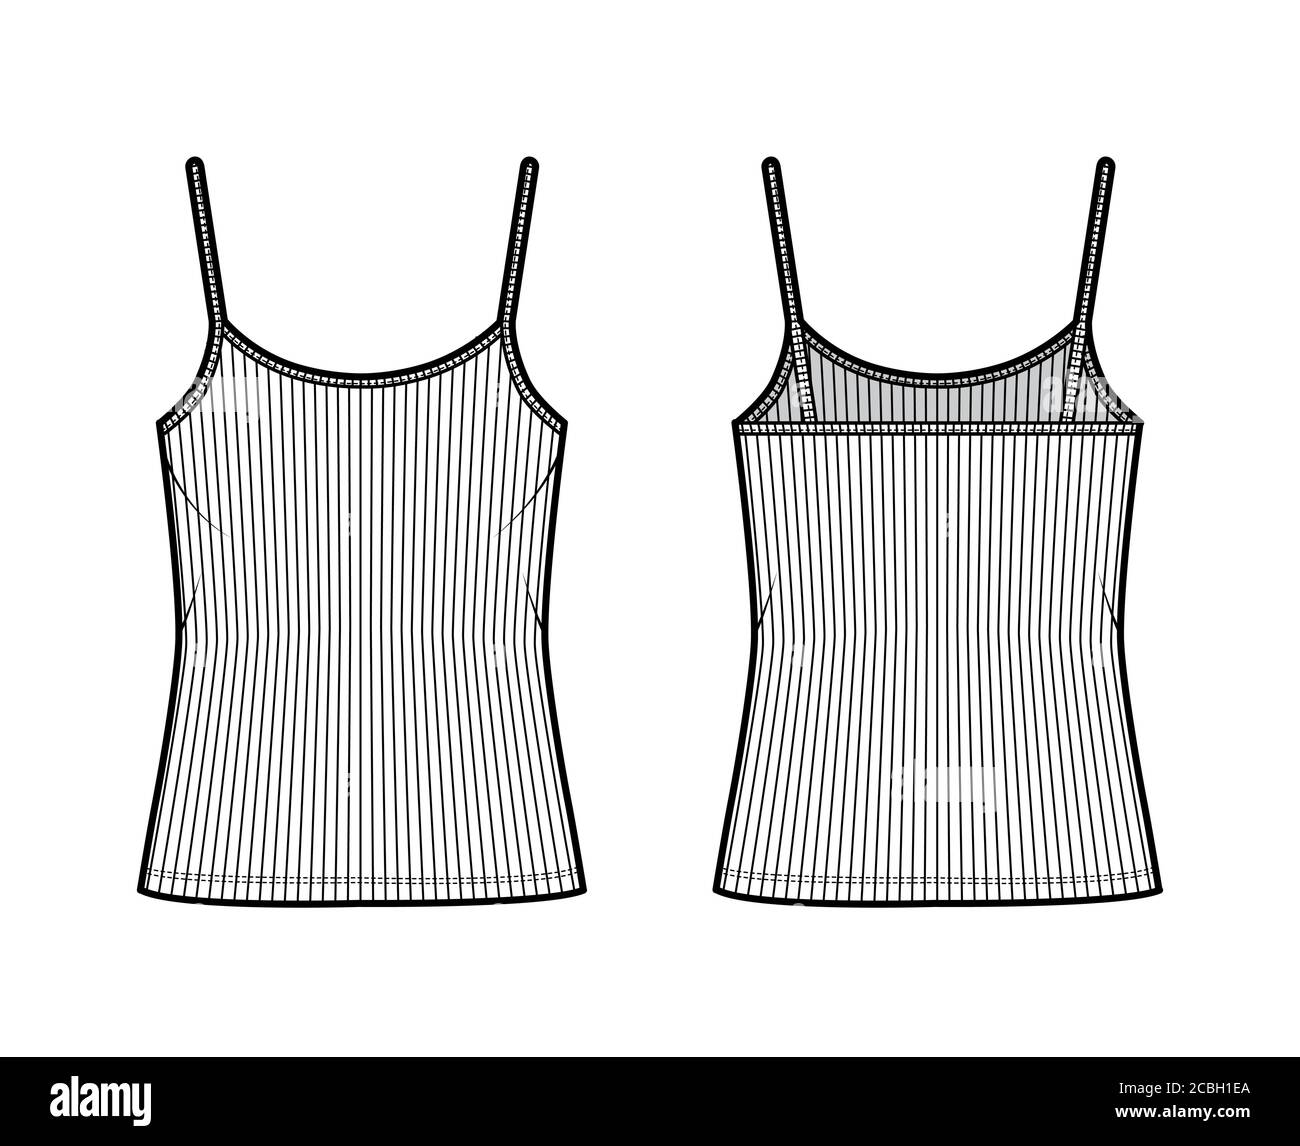 Ribbed camisole technical fashion illustration with scoop neck ...